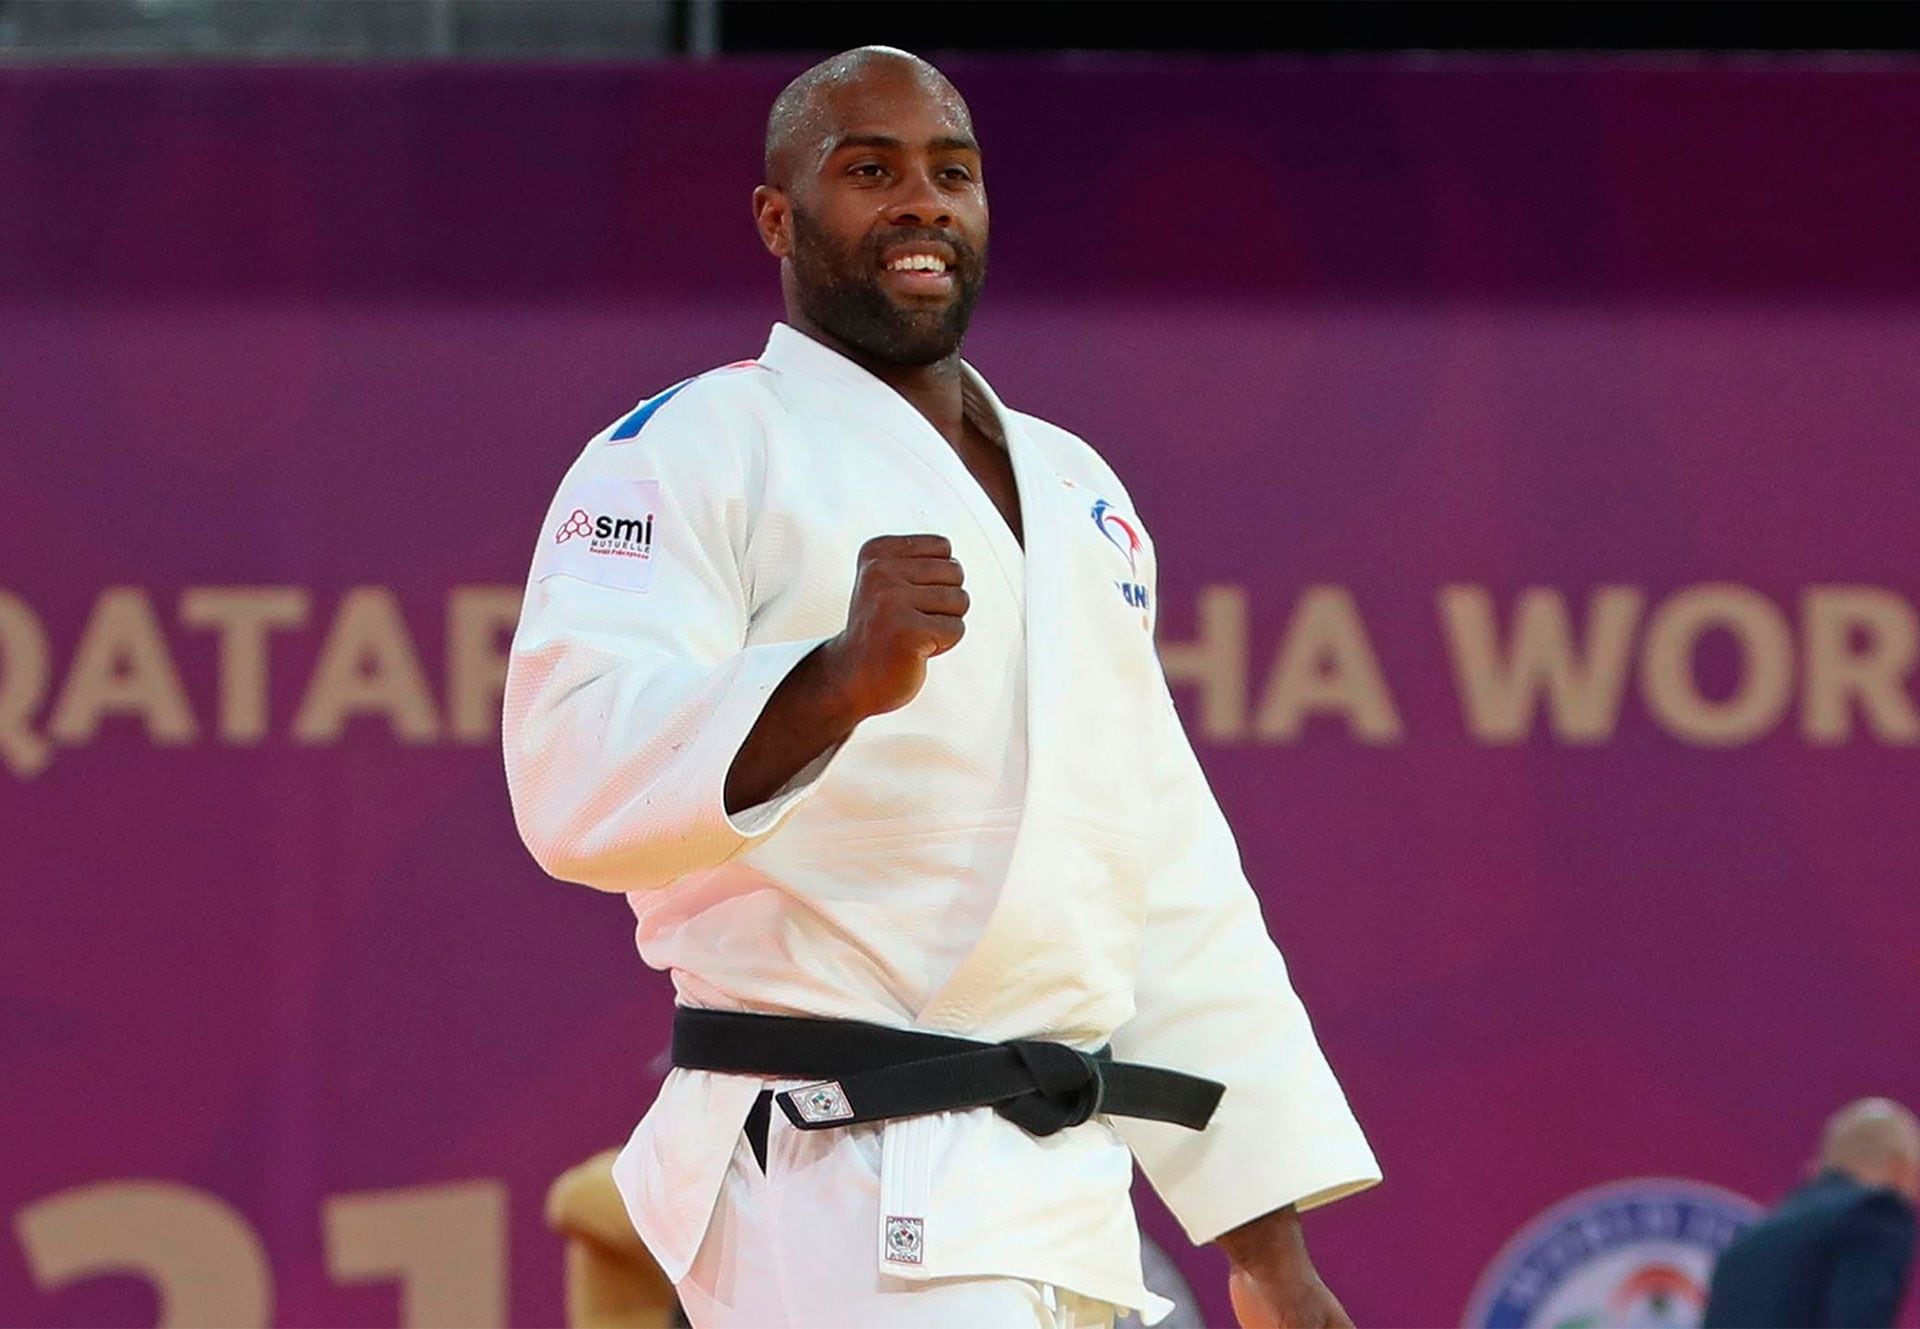 Tight fist for Teddy Riner after shouting world champion.